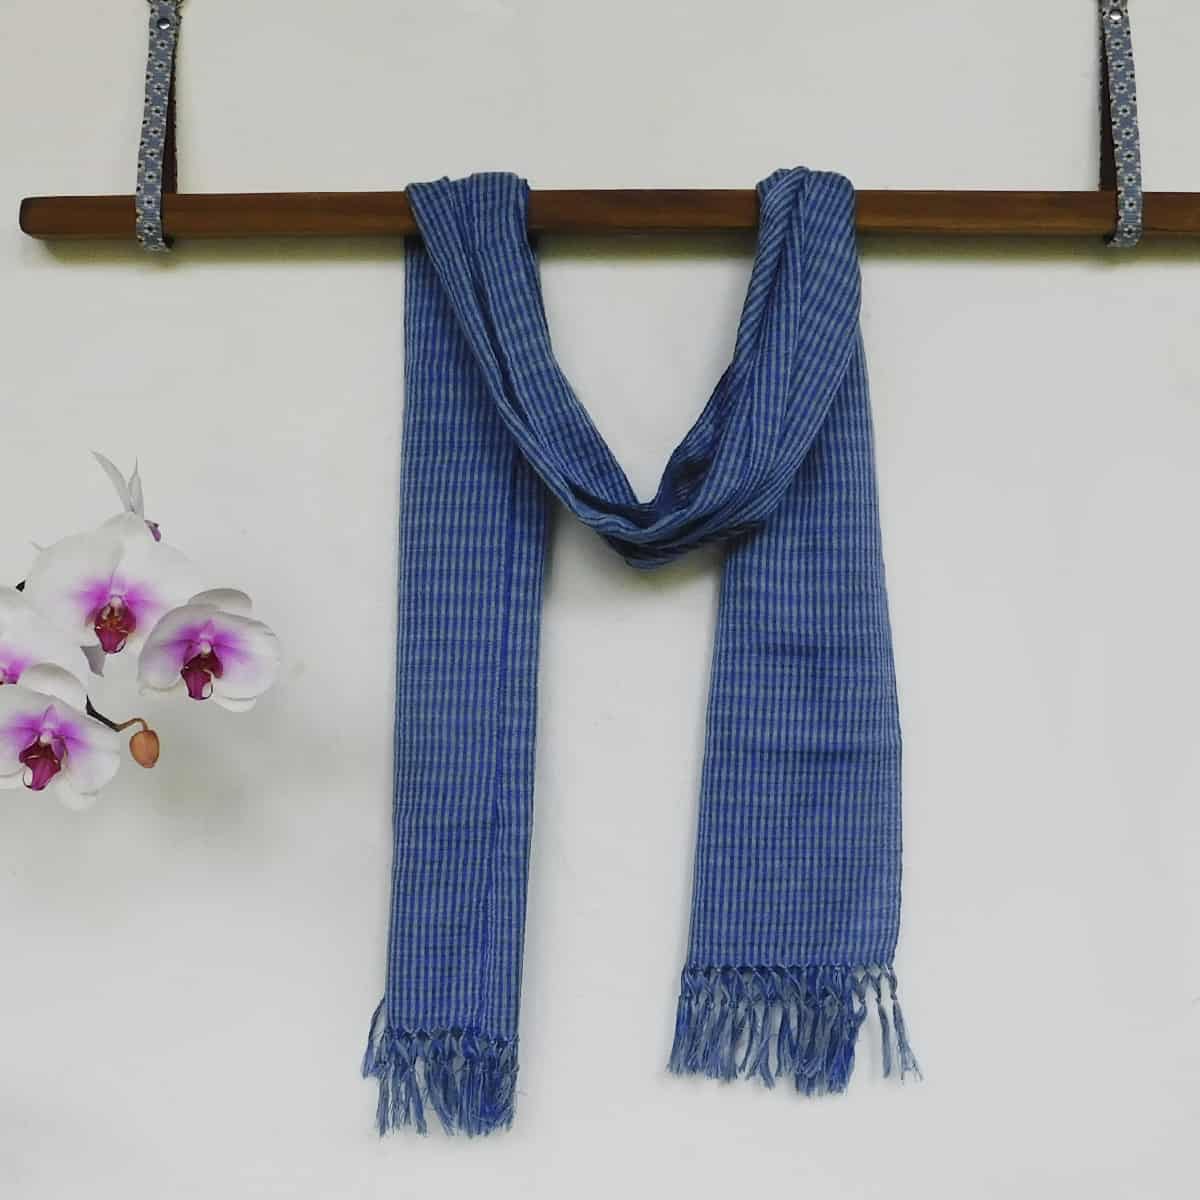 Blue and gray scarf hand woven in Guatemala draped over a hanging wooden beam next to white and purple lily flowers